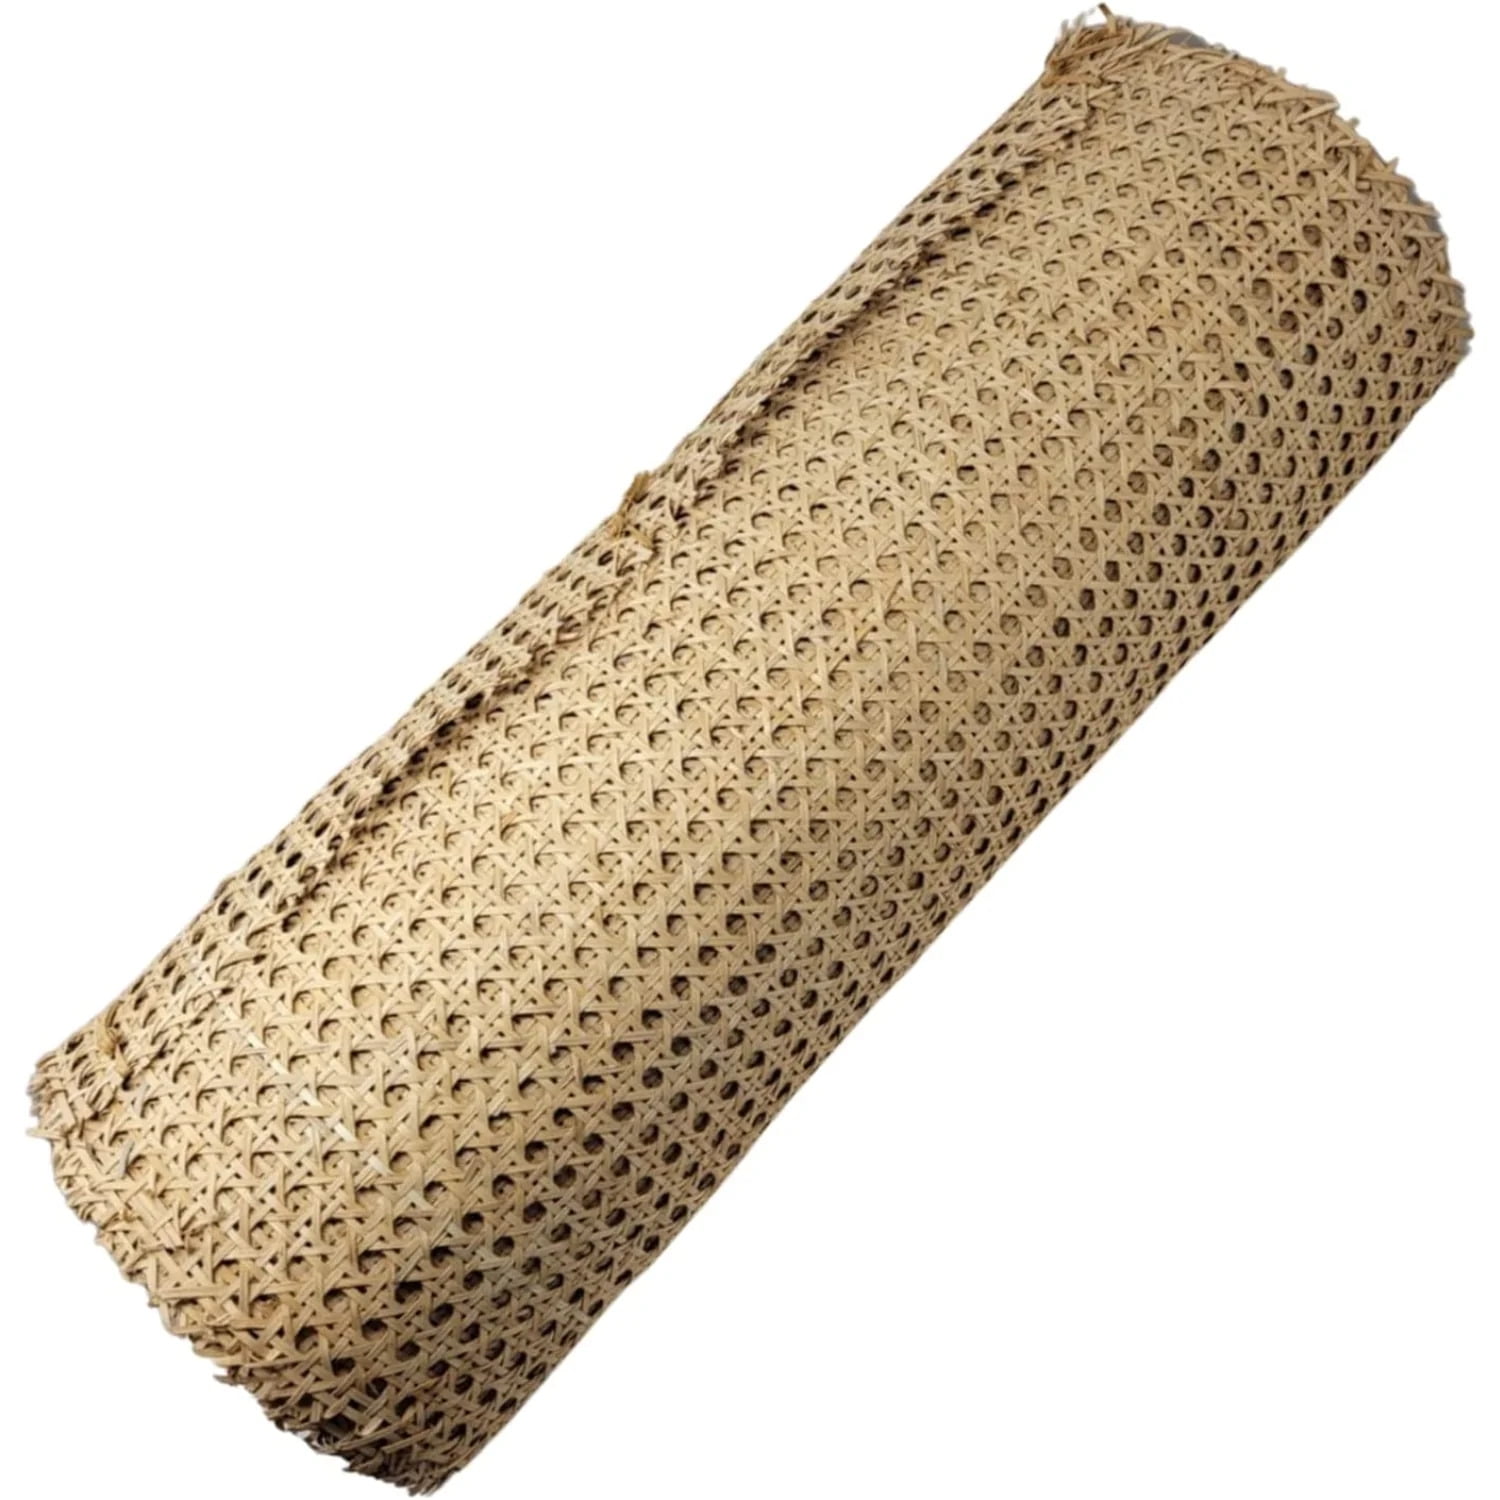 PUCIO Natural Rattan Cane Webbing Roll, 14 16 18 20 22 24 36 40in Wide  Natural Rattan Cane Webbing Roll for Caning Projects Mesh Rattan Fabric for